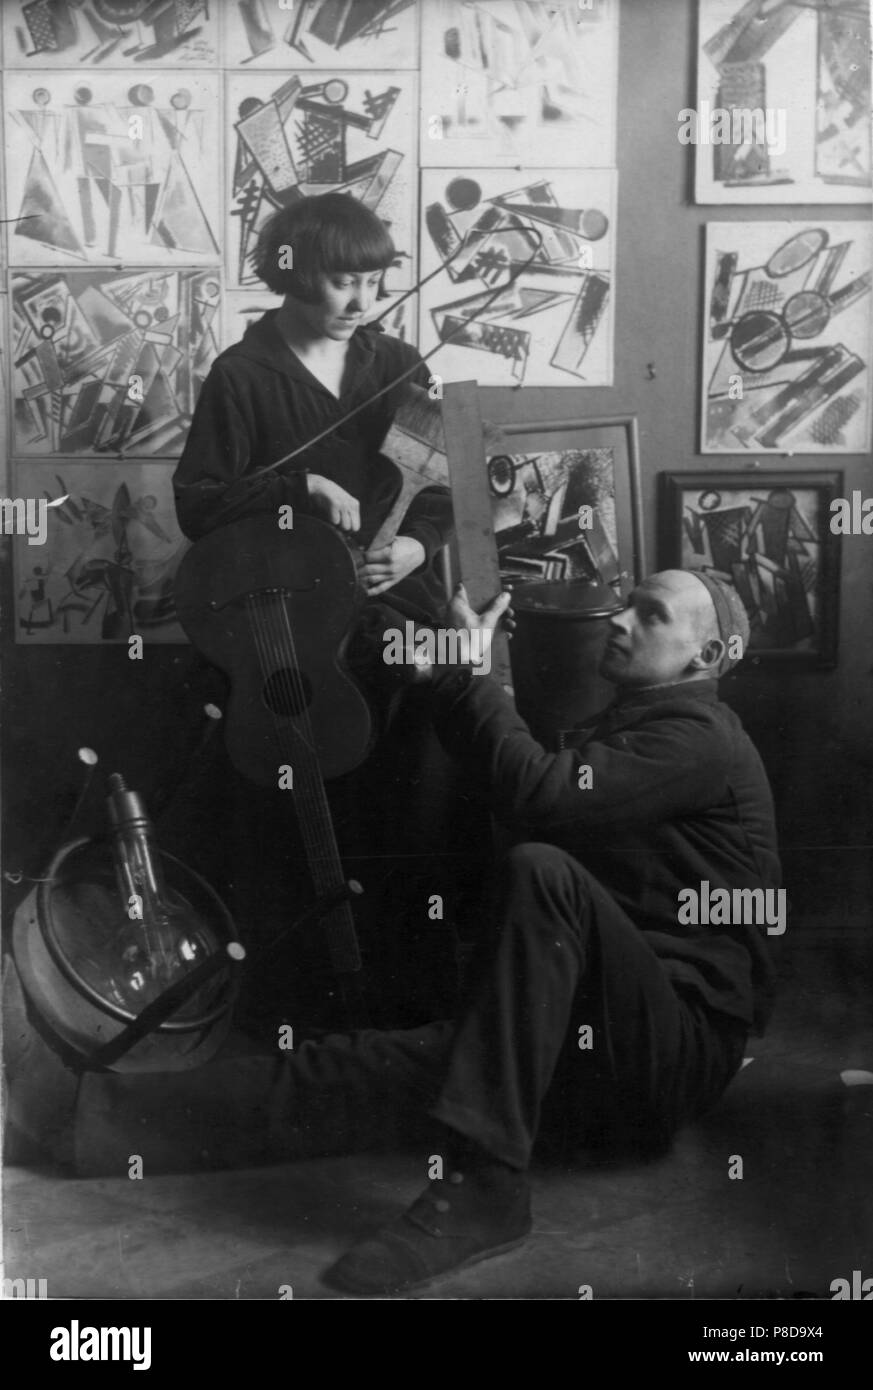 First Double Portrait of Stepanova and Rodchenko. Museum: PRIVATE COLLECTION. Stock Photo